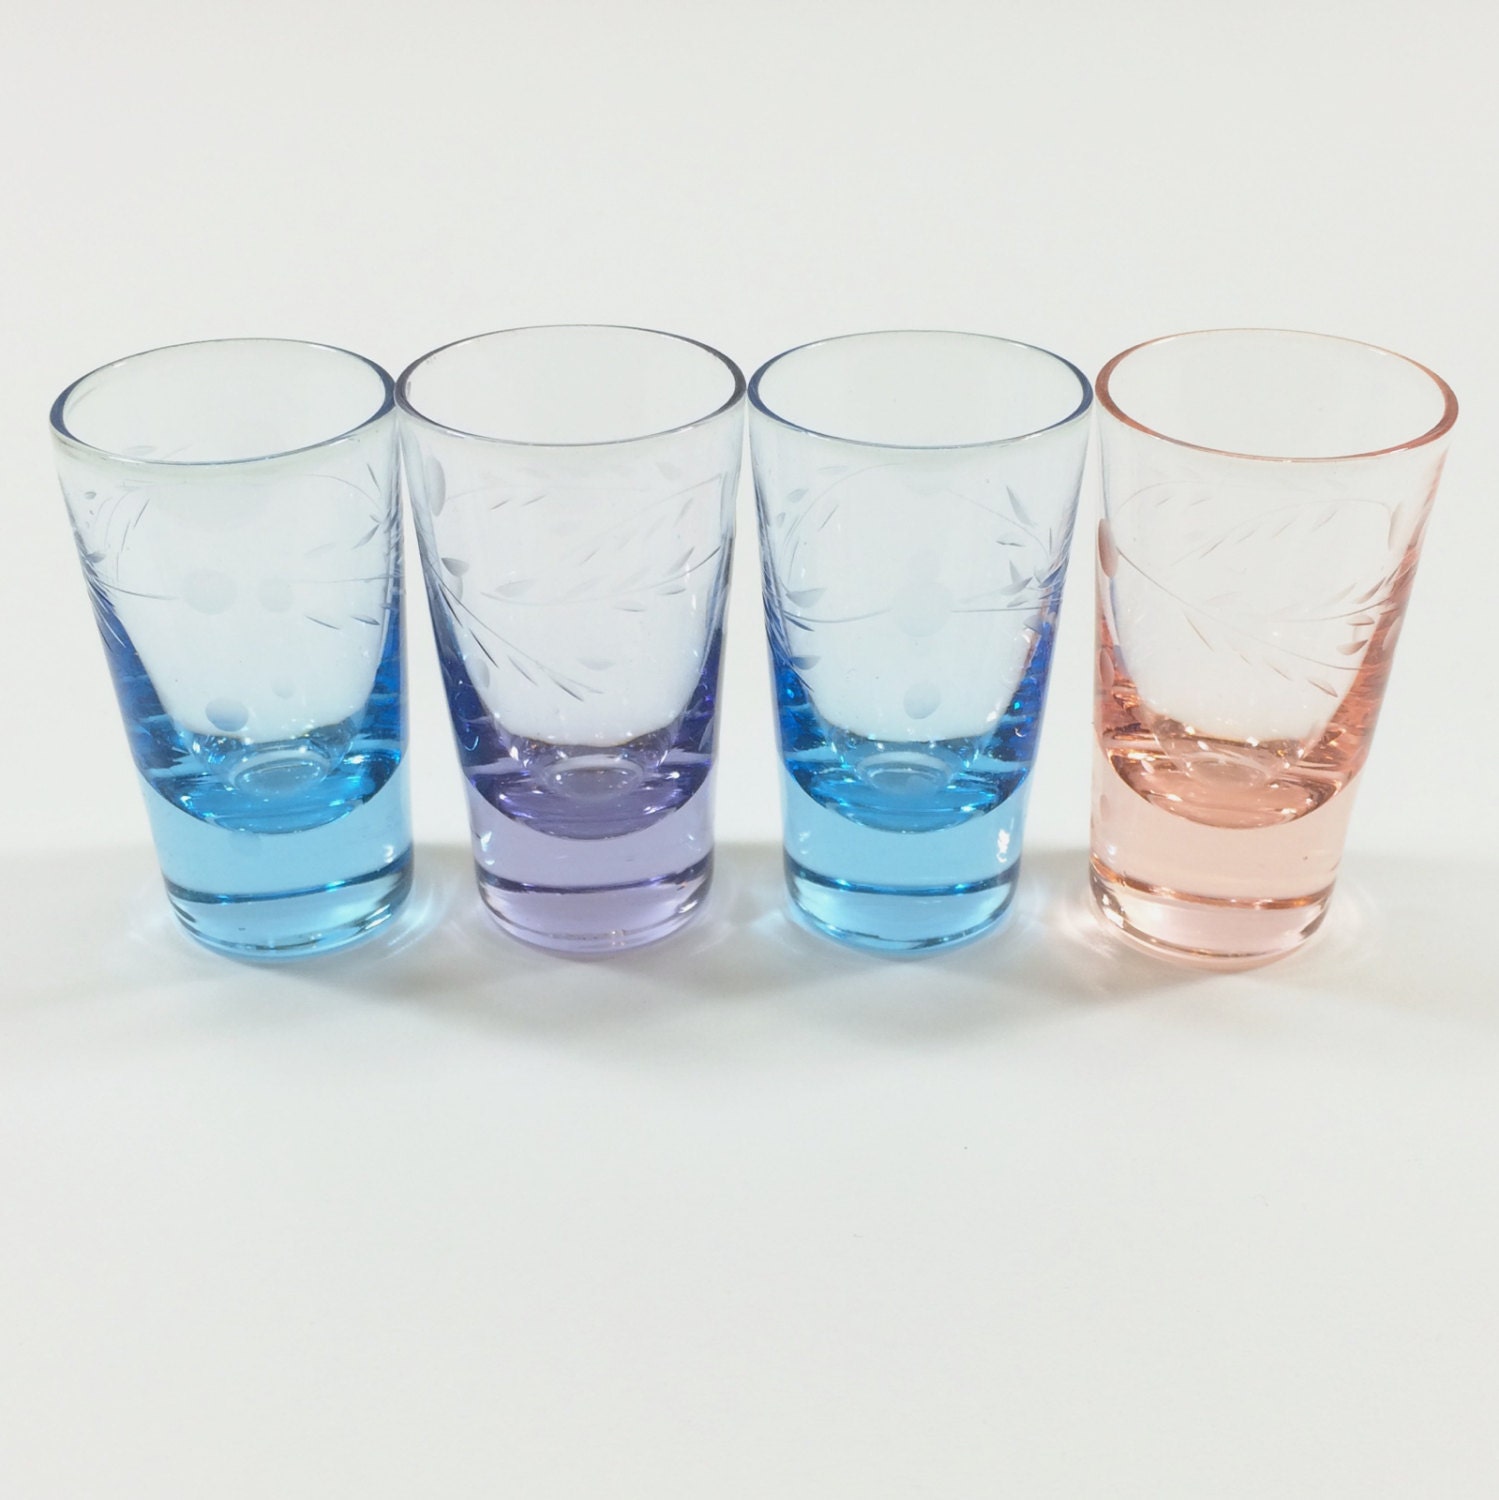 Vintage Multi Color Etched Shot Glasses In Blue Purple And